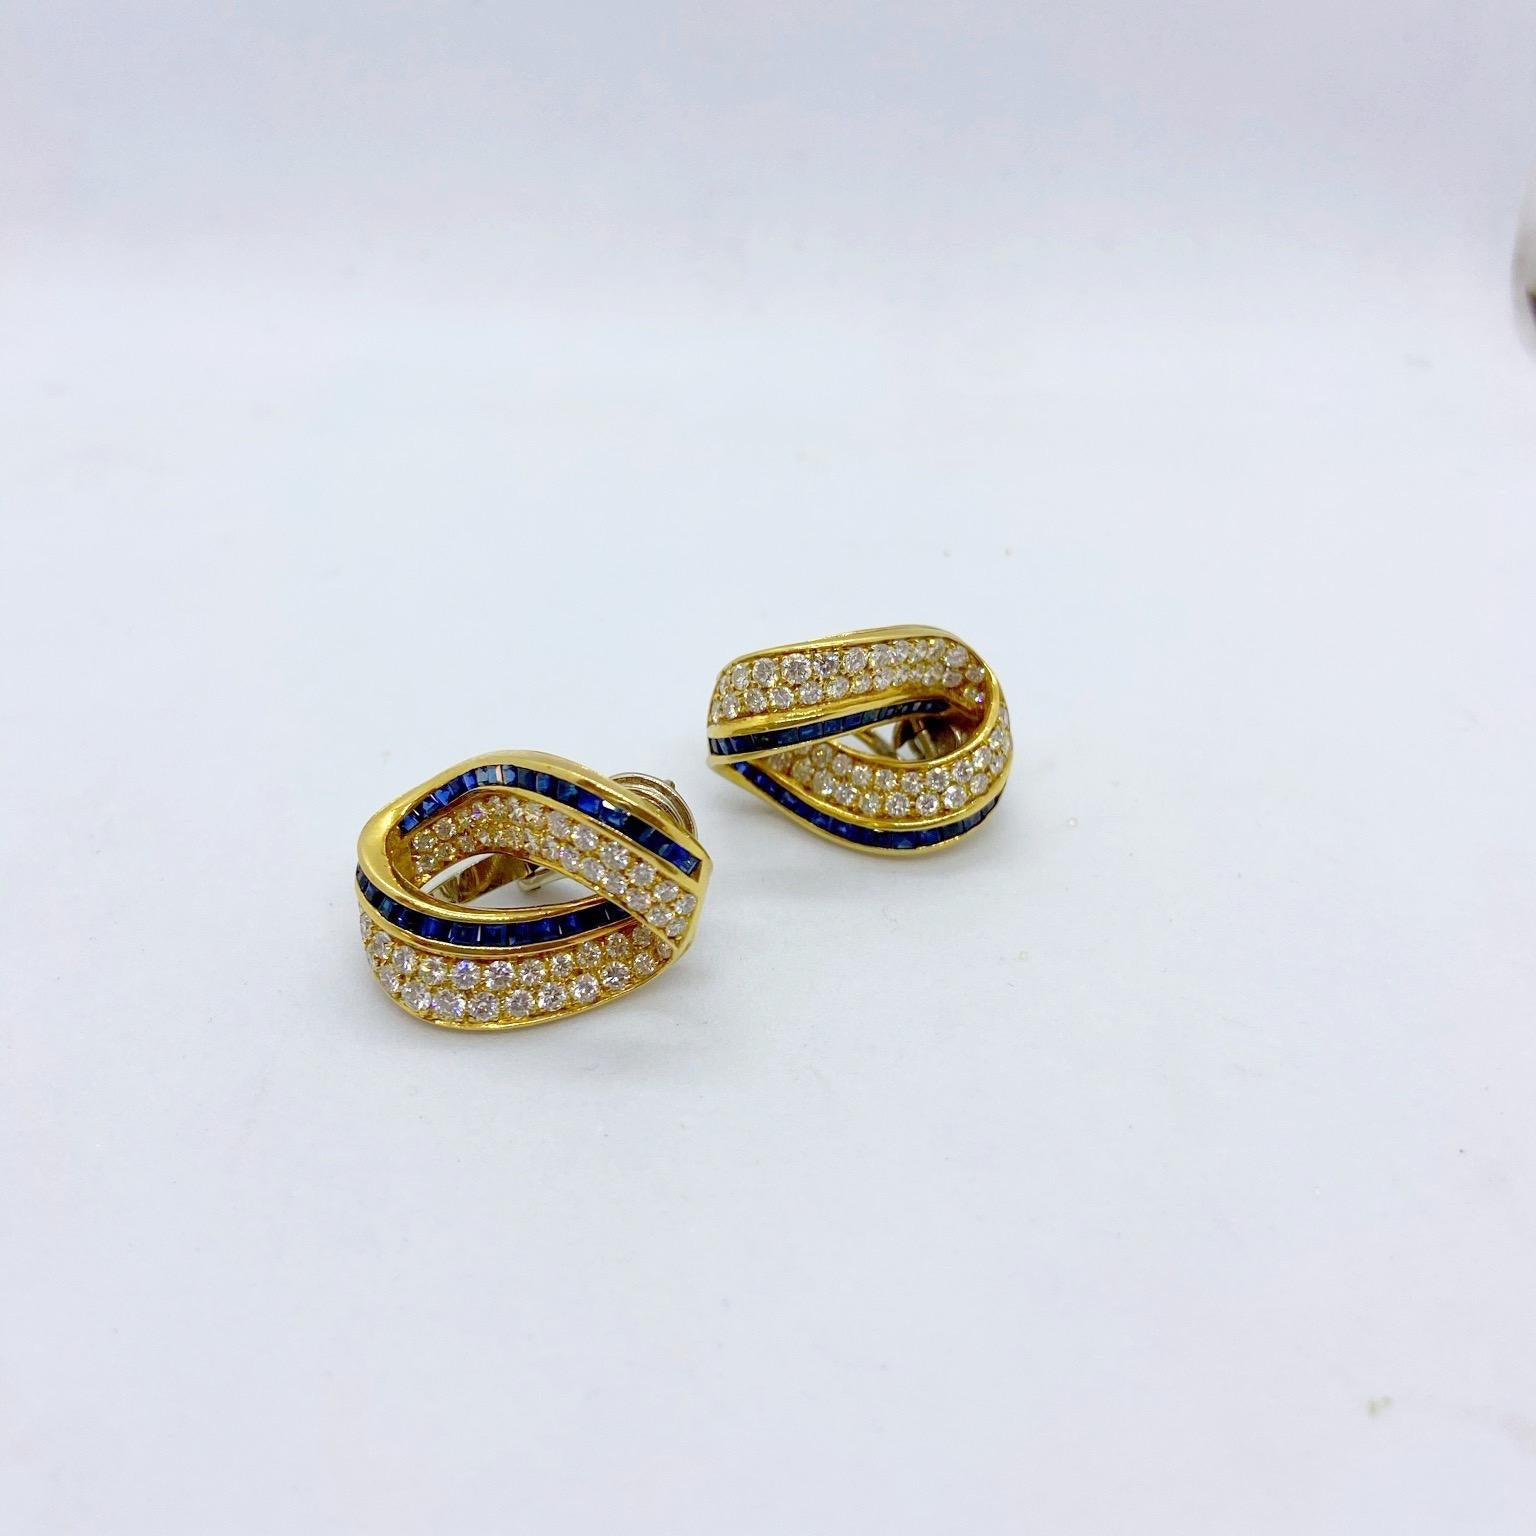 Round Cut Cellini 18KT Gold 2.39 Carat Diamond and 2.59 Carat Sapphire Infinity Earrings For Sale